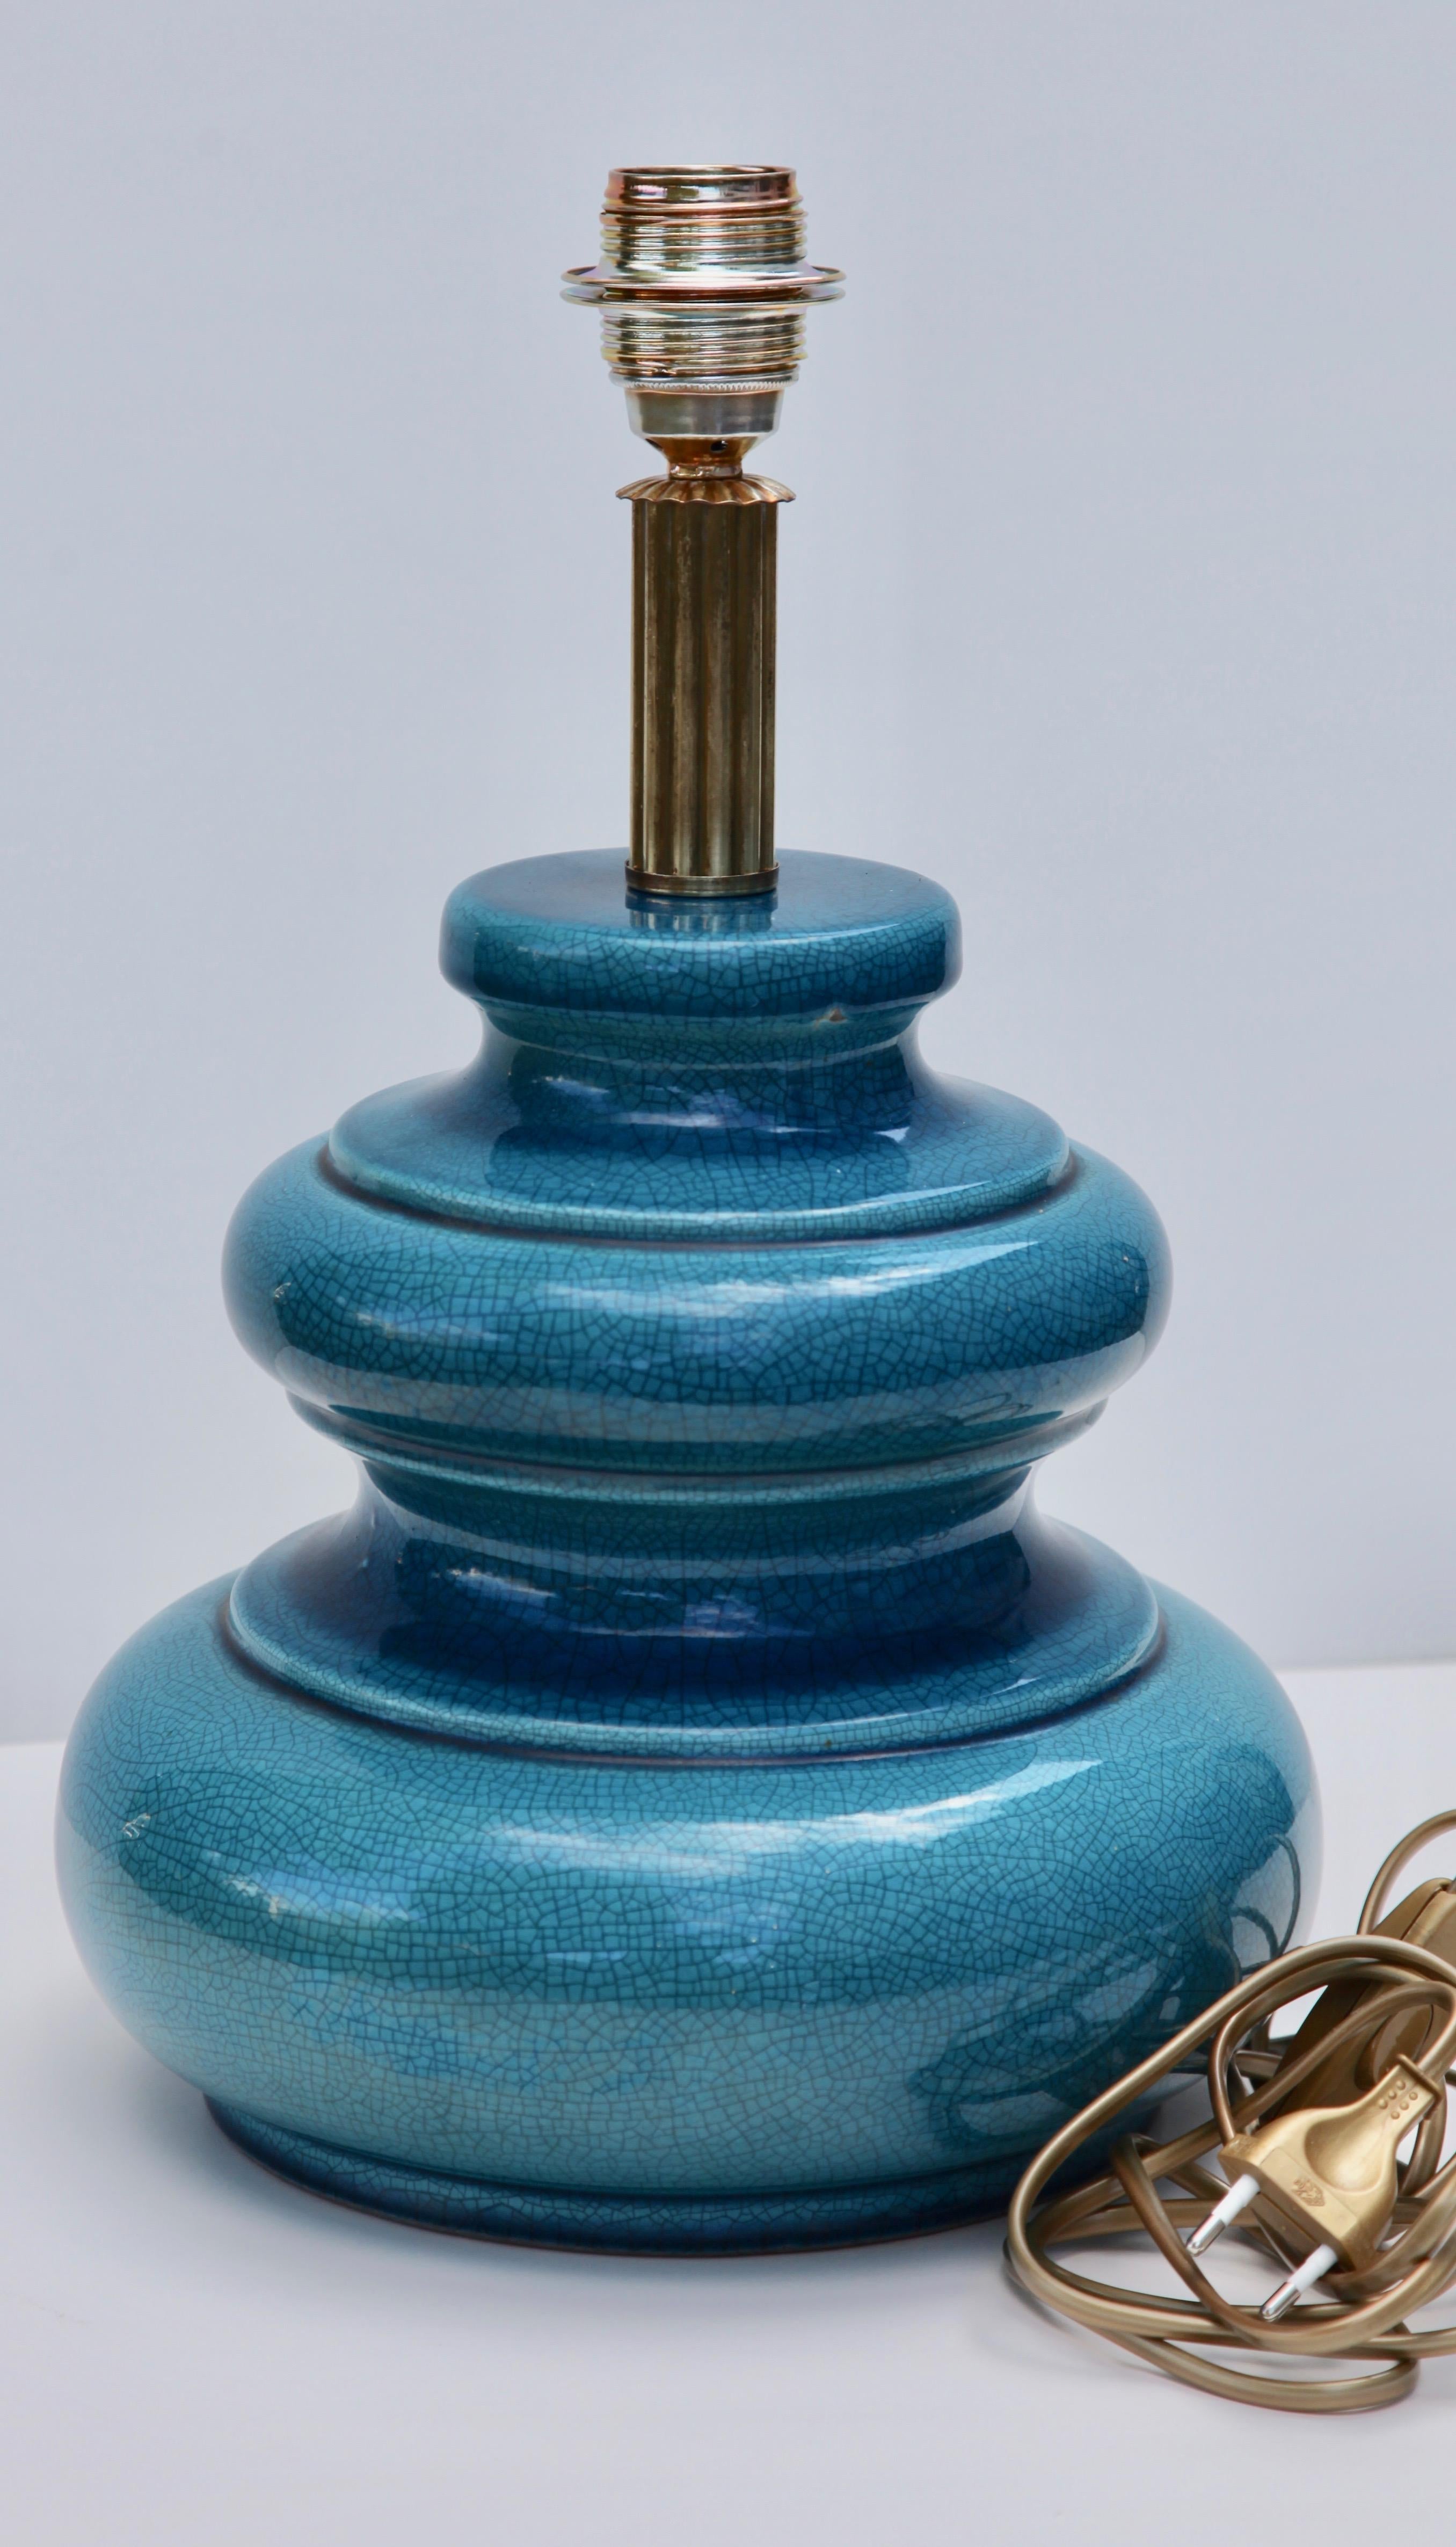 Chinese Vibrant Turquoise Ceramic Celadon Table Lamp with Fine Crackle Glaze